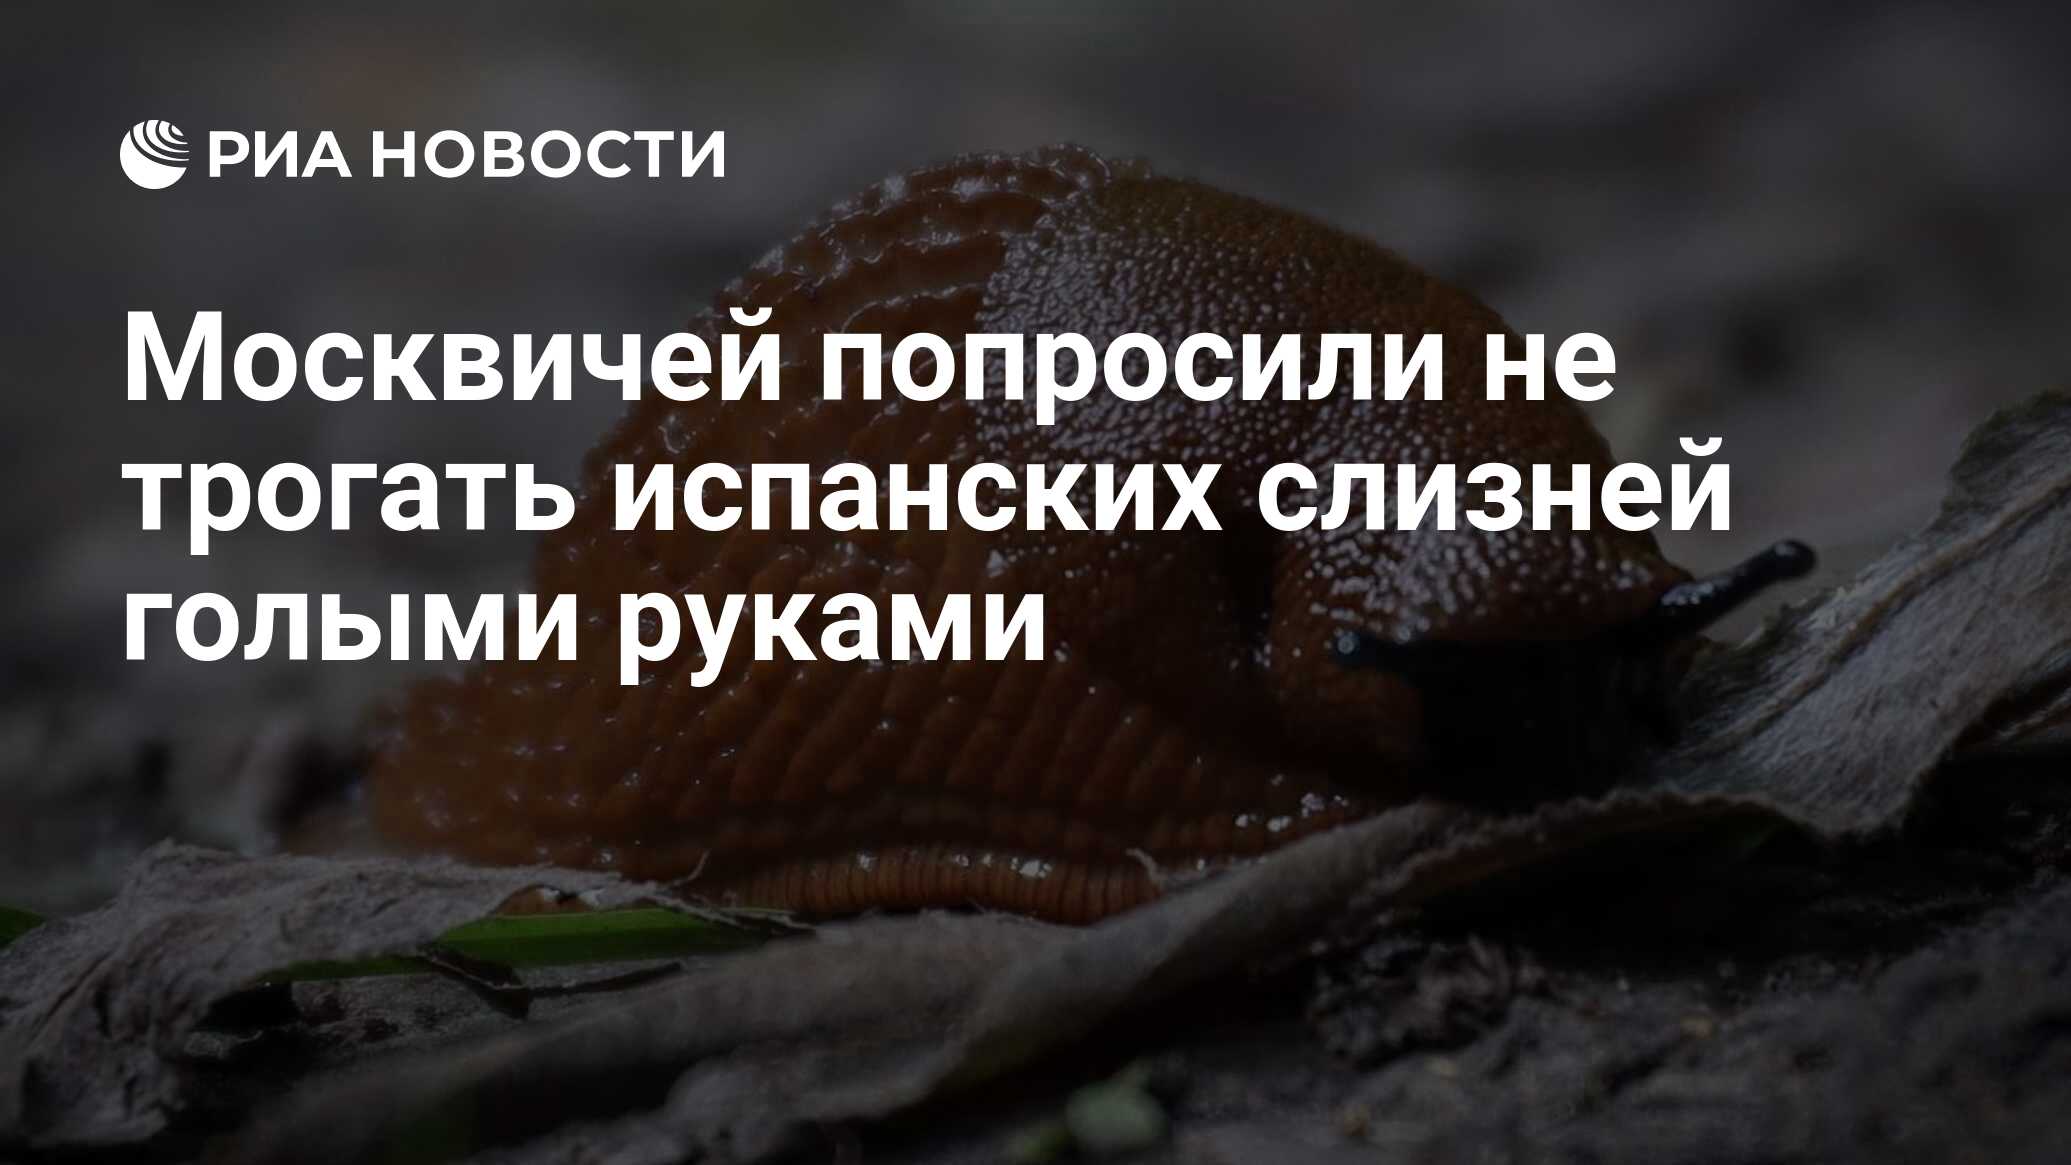 Muscovites requested to not contact Spanish slugs with naked fingers